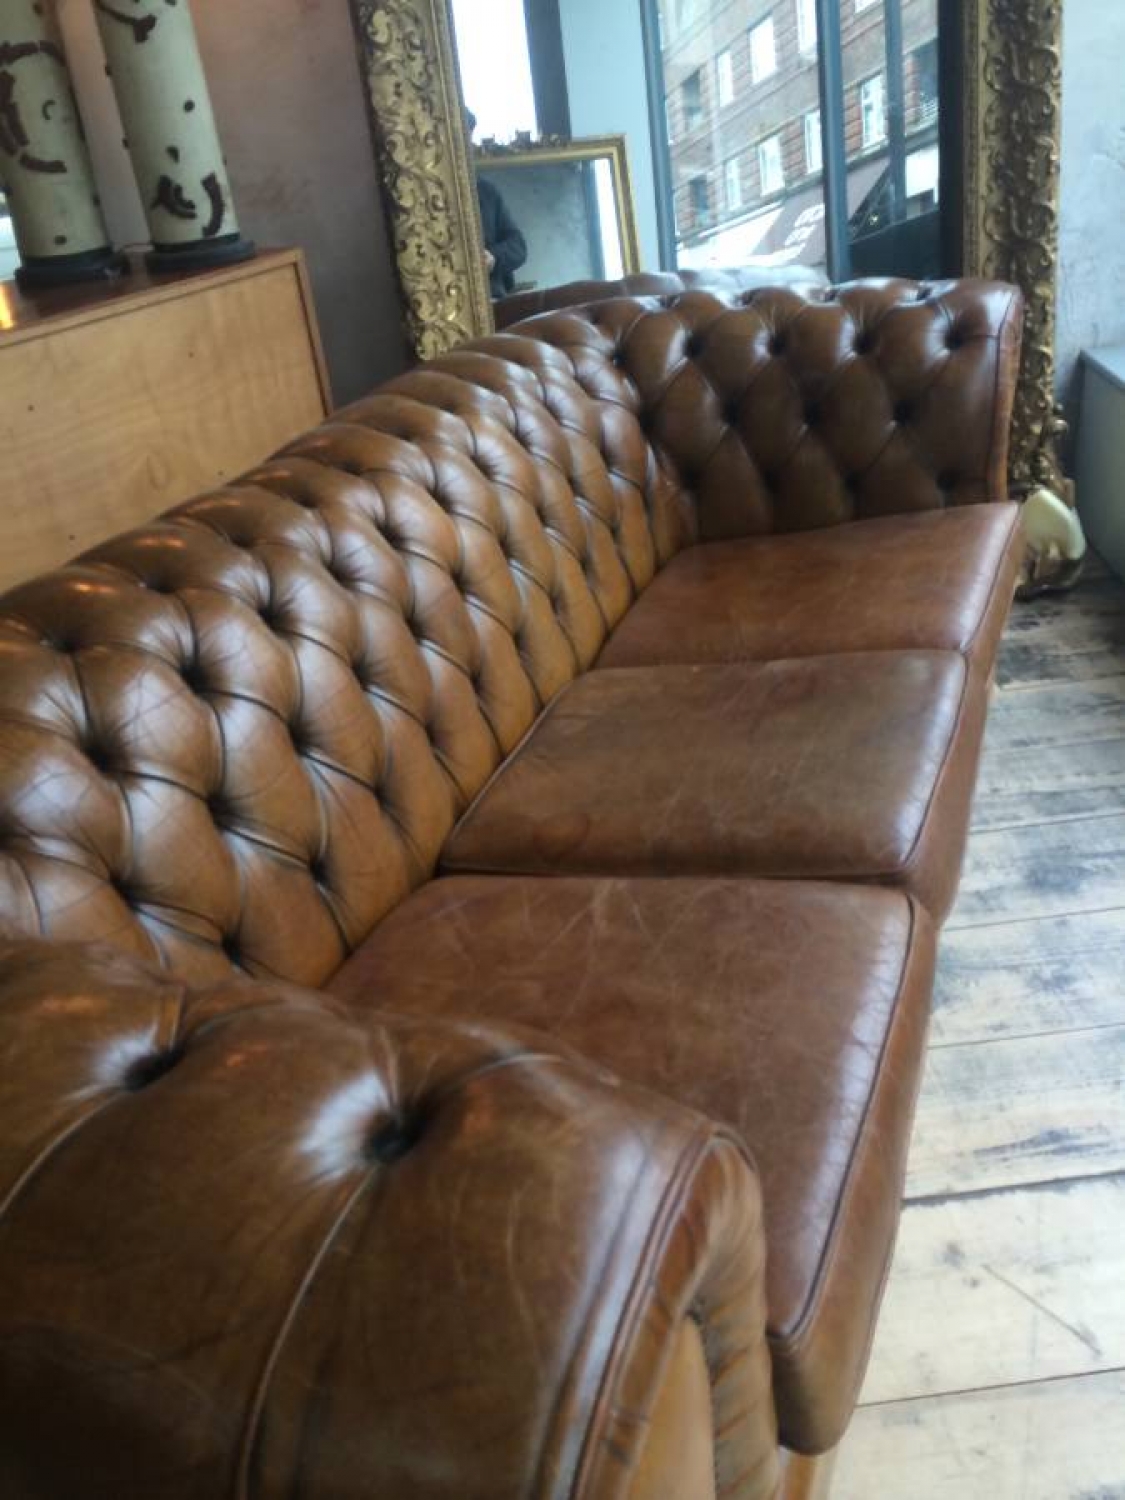 Tan Leather Chesterfield